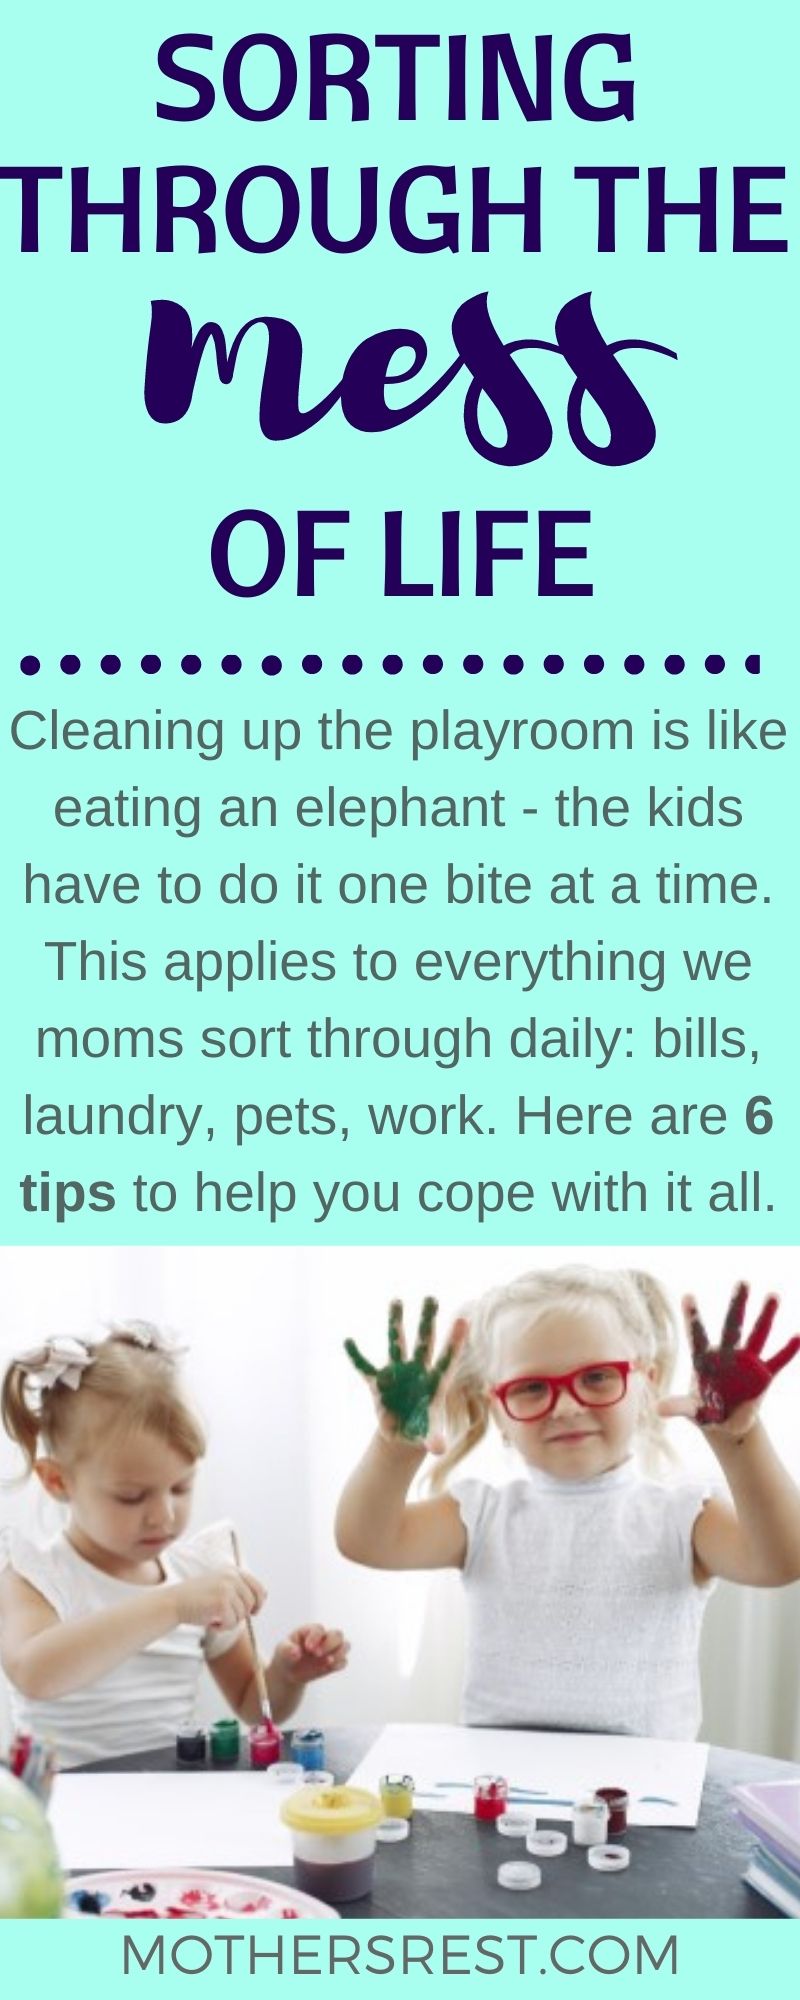 Cleaning up the playroom is like eating an elephant - the kids have to do it one bite at a time. This applies to everything we moms sort through daily: bills, laundry, pets, work. Here are 6 tips to help you cope with it all.